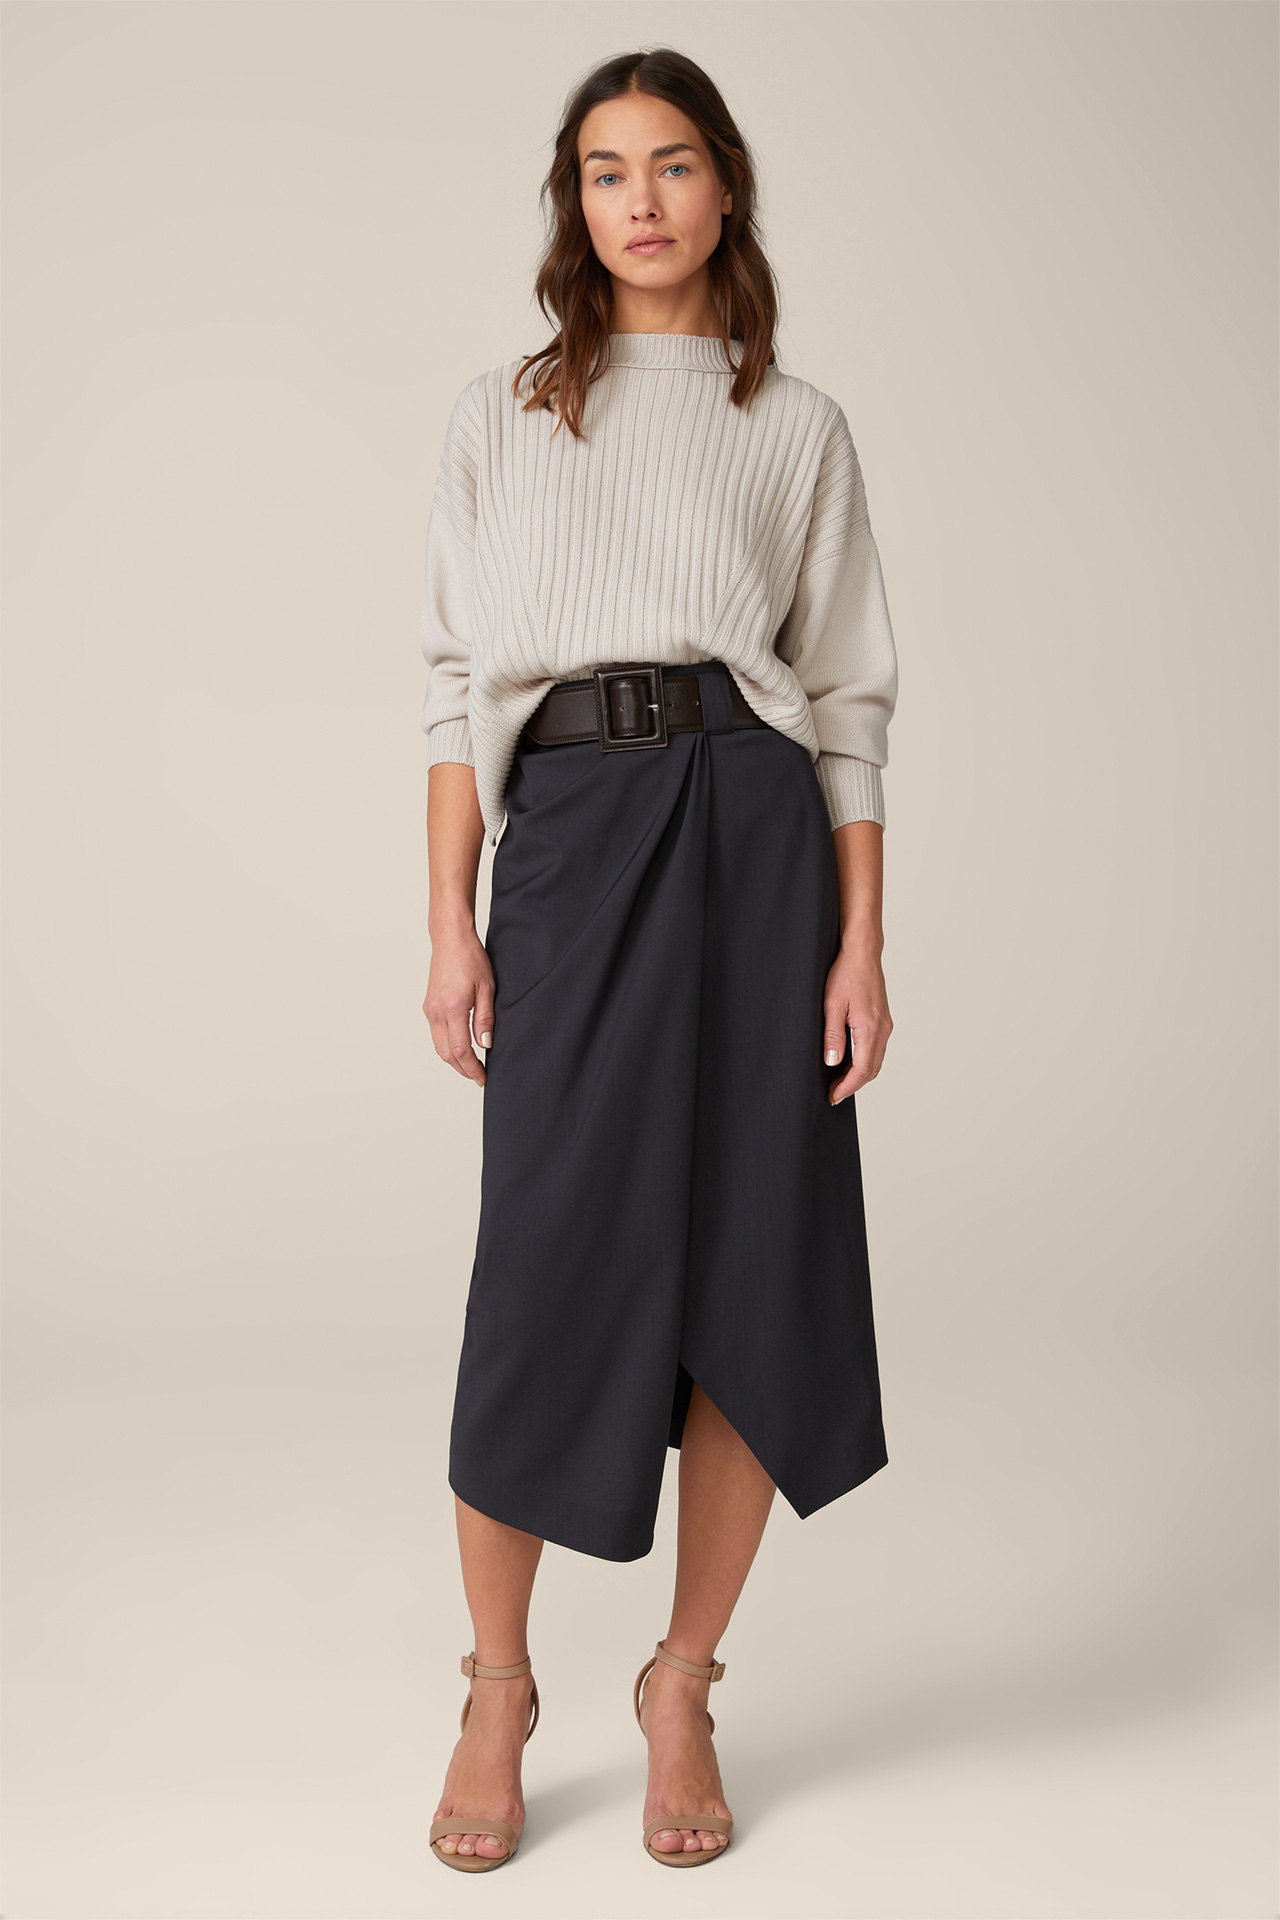 Virgin Wool Midi Length Skirt with Wrapover in Anthracite